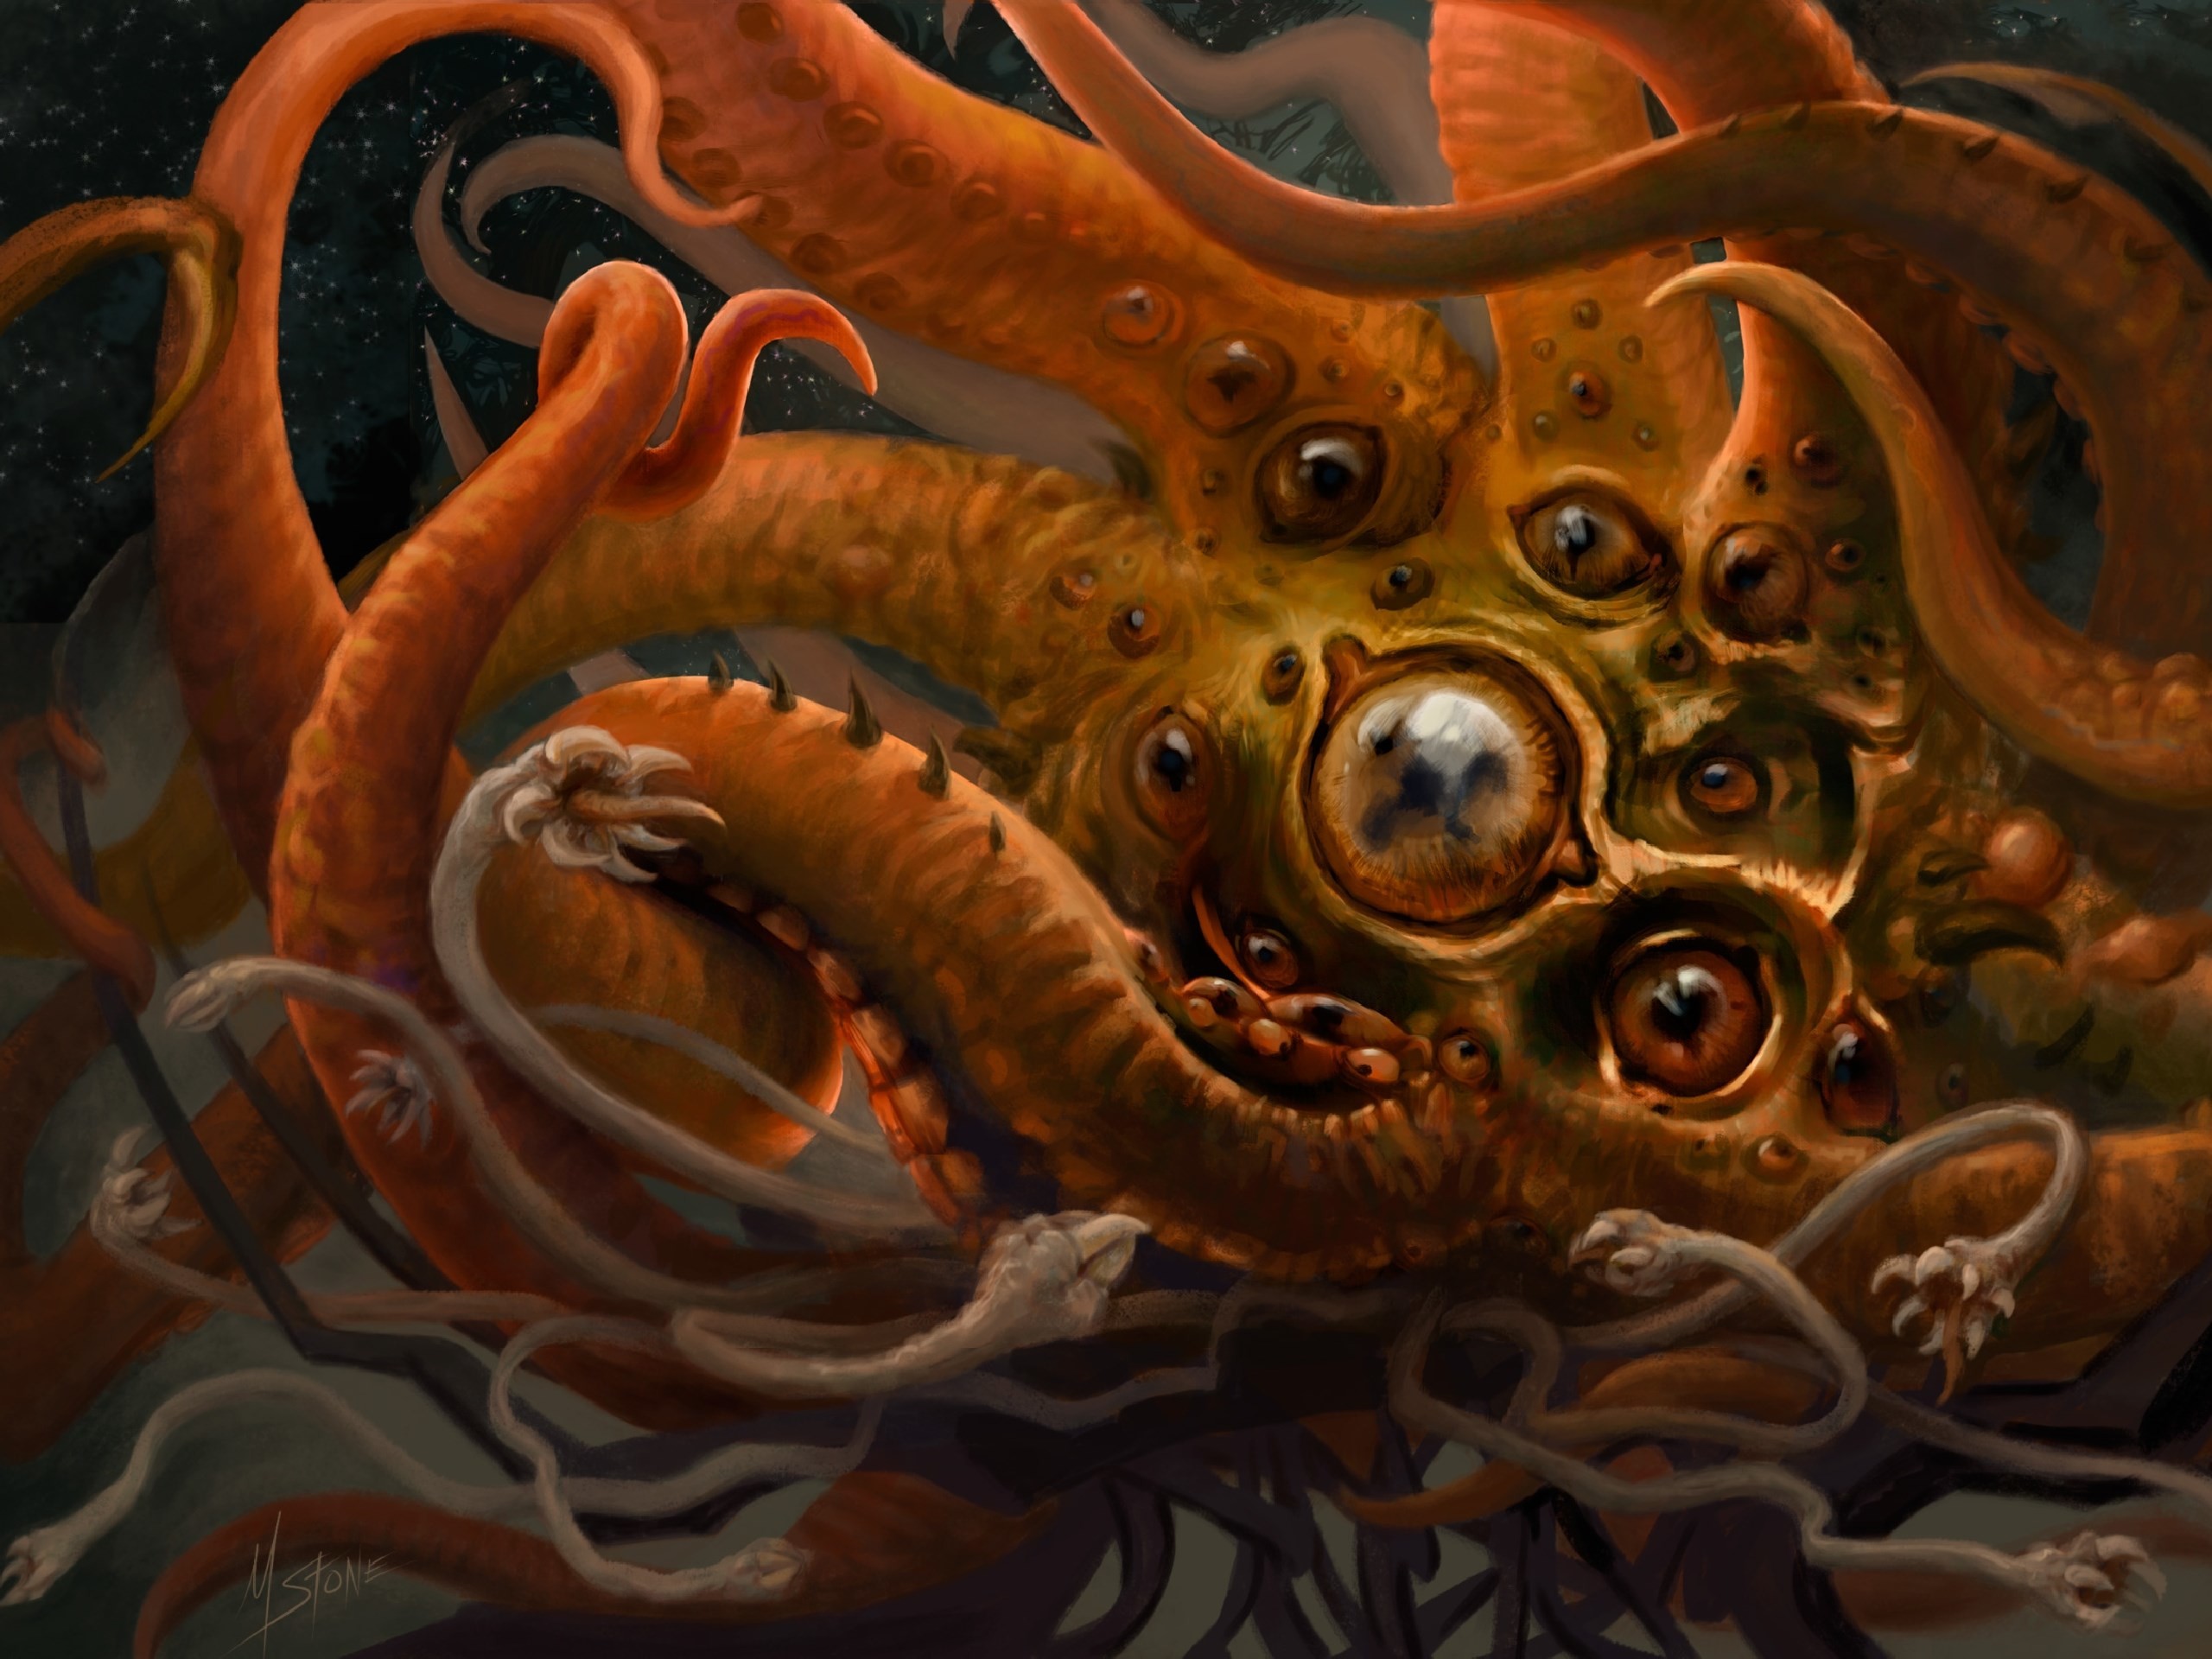 2560x1920 Explore Cthulhu Art, Lovecraft Cthulhu, and more!